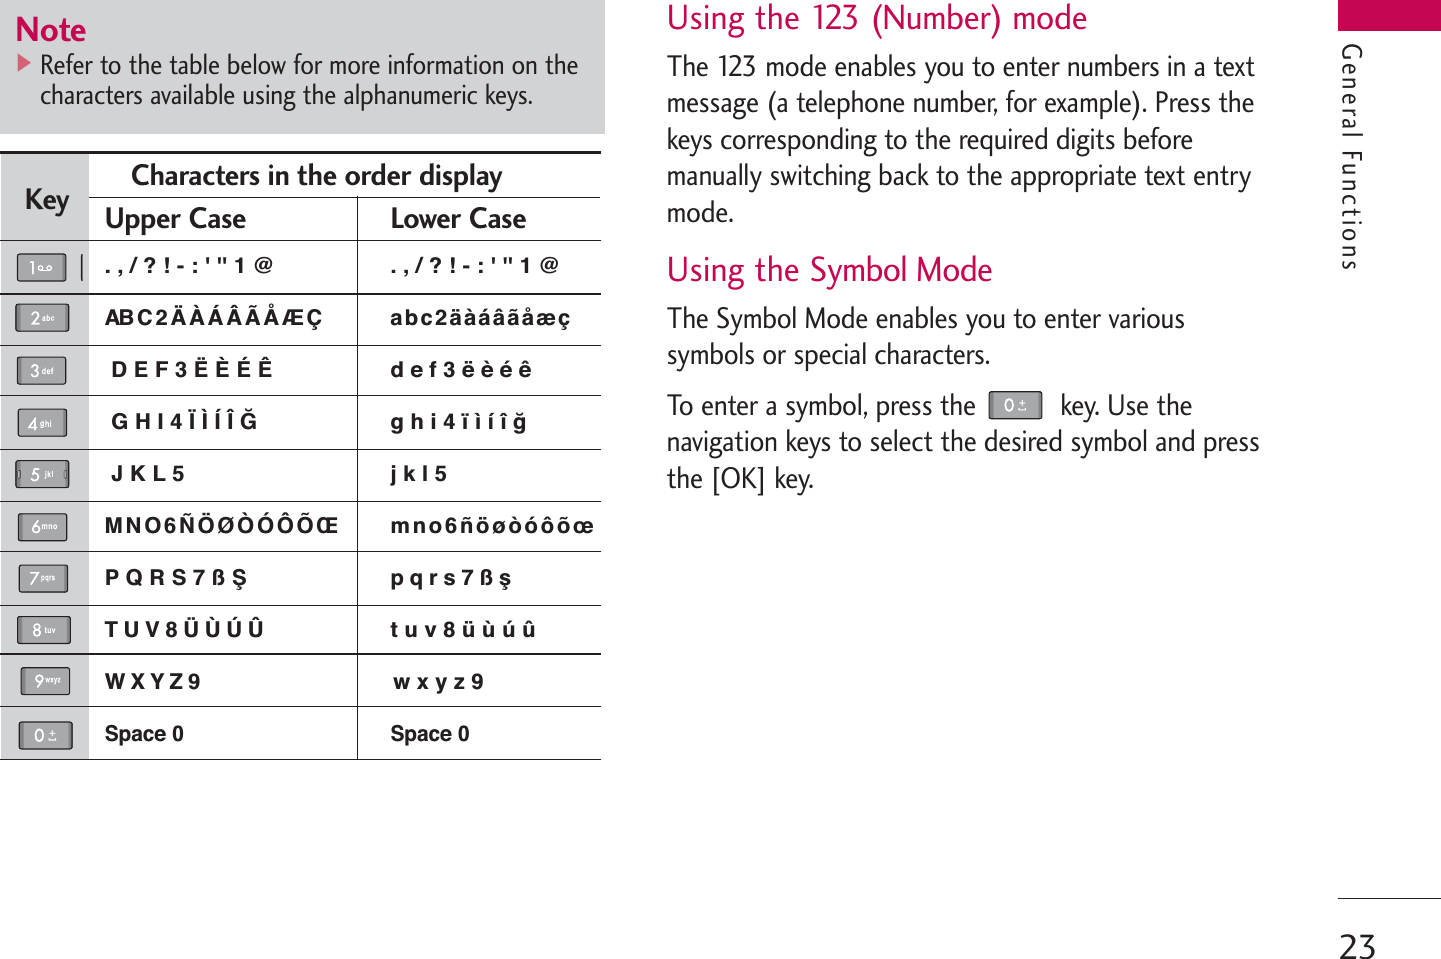 23General FunctionsUsing the 123 (Number) modeThe 123 mode enables you to enter numbers in a textmessage (a telephone number, for example). Press thekeys corresponding to the required digits beforemanually switching back to the appropriate text entrymode.Using the Symbol ModeThe Symbol Mode enables you to enter varioussymbols or special characters.To enter a symbol, press the  key. Use thenavigation keys to select the desired symbol and pressthe [OK] key.Key Upper Case Lower Case. , / ? ! - : &apos; &apos;&apos; 1 @ . , / ? ! - : &apos; &apos;&apos; 1 @AB C 2 Ä À Á Â Ã Å Æ Ç a b c 2 ä à á â ã å æ çD E F 3 Ë È É Ê d e f 3 ë è é êG H I 4 Ï Ì Í Î ˝g h i 4 ï ì í î ©J K L 5 j k l 5M N O 6 Ñ Ö Ø Ò Ó Ô Õ Œ m n o 6 ñ ö ø ò ó ô õ œP Q R S 7 ß Íp q r s 7 ß ßT U V 8 Ü Ù Ú Û t u v 8 ü ù ú ûW X Y Z 9 w x y z 9Space 0 Space 0Characters in the order displayNote]Refer to the table below for more information on thecharacters available using the alphanumeric keys.